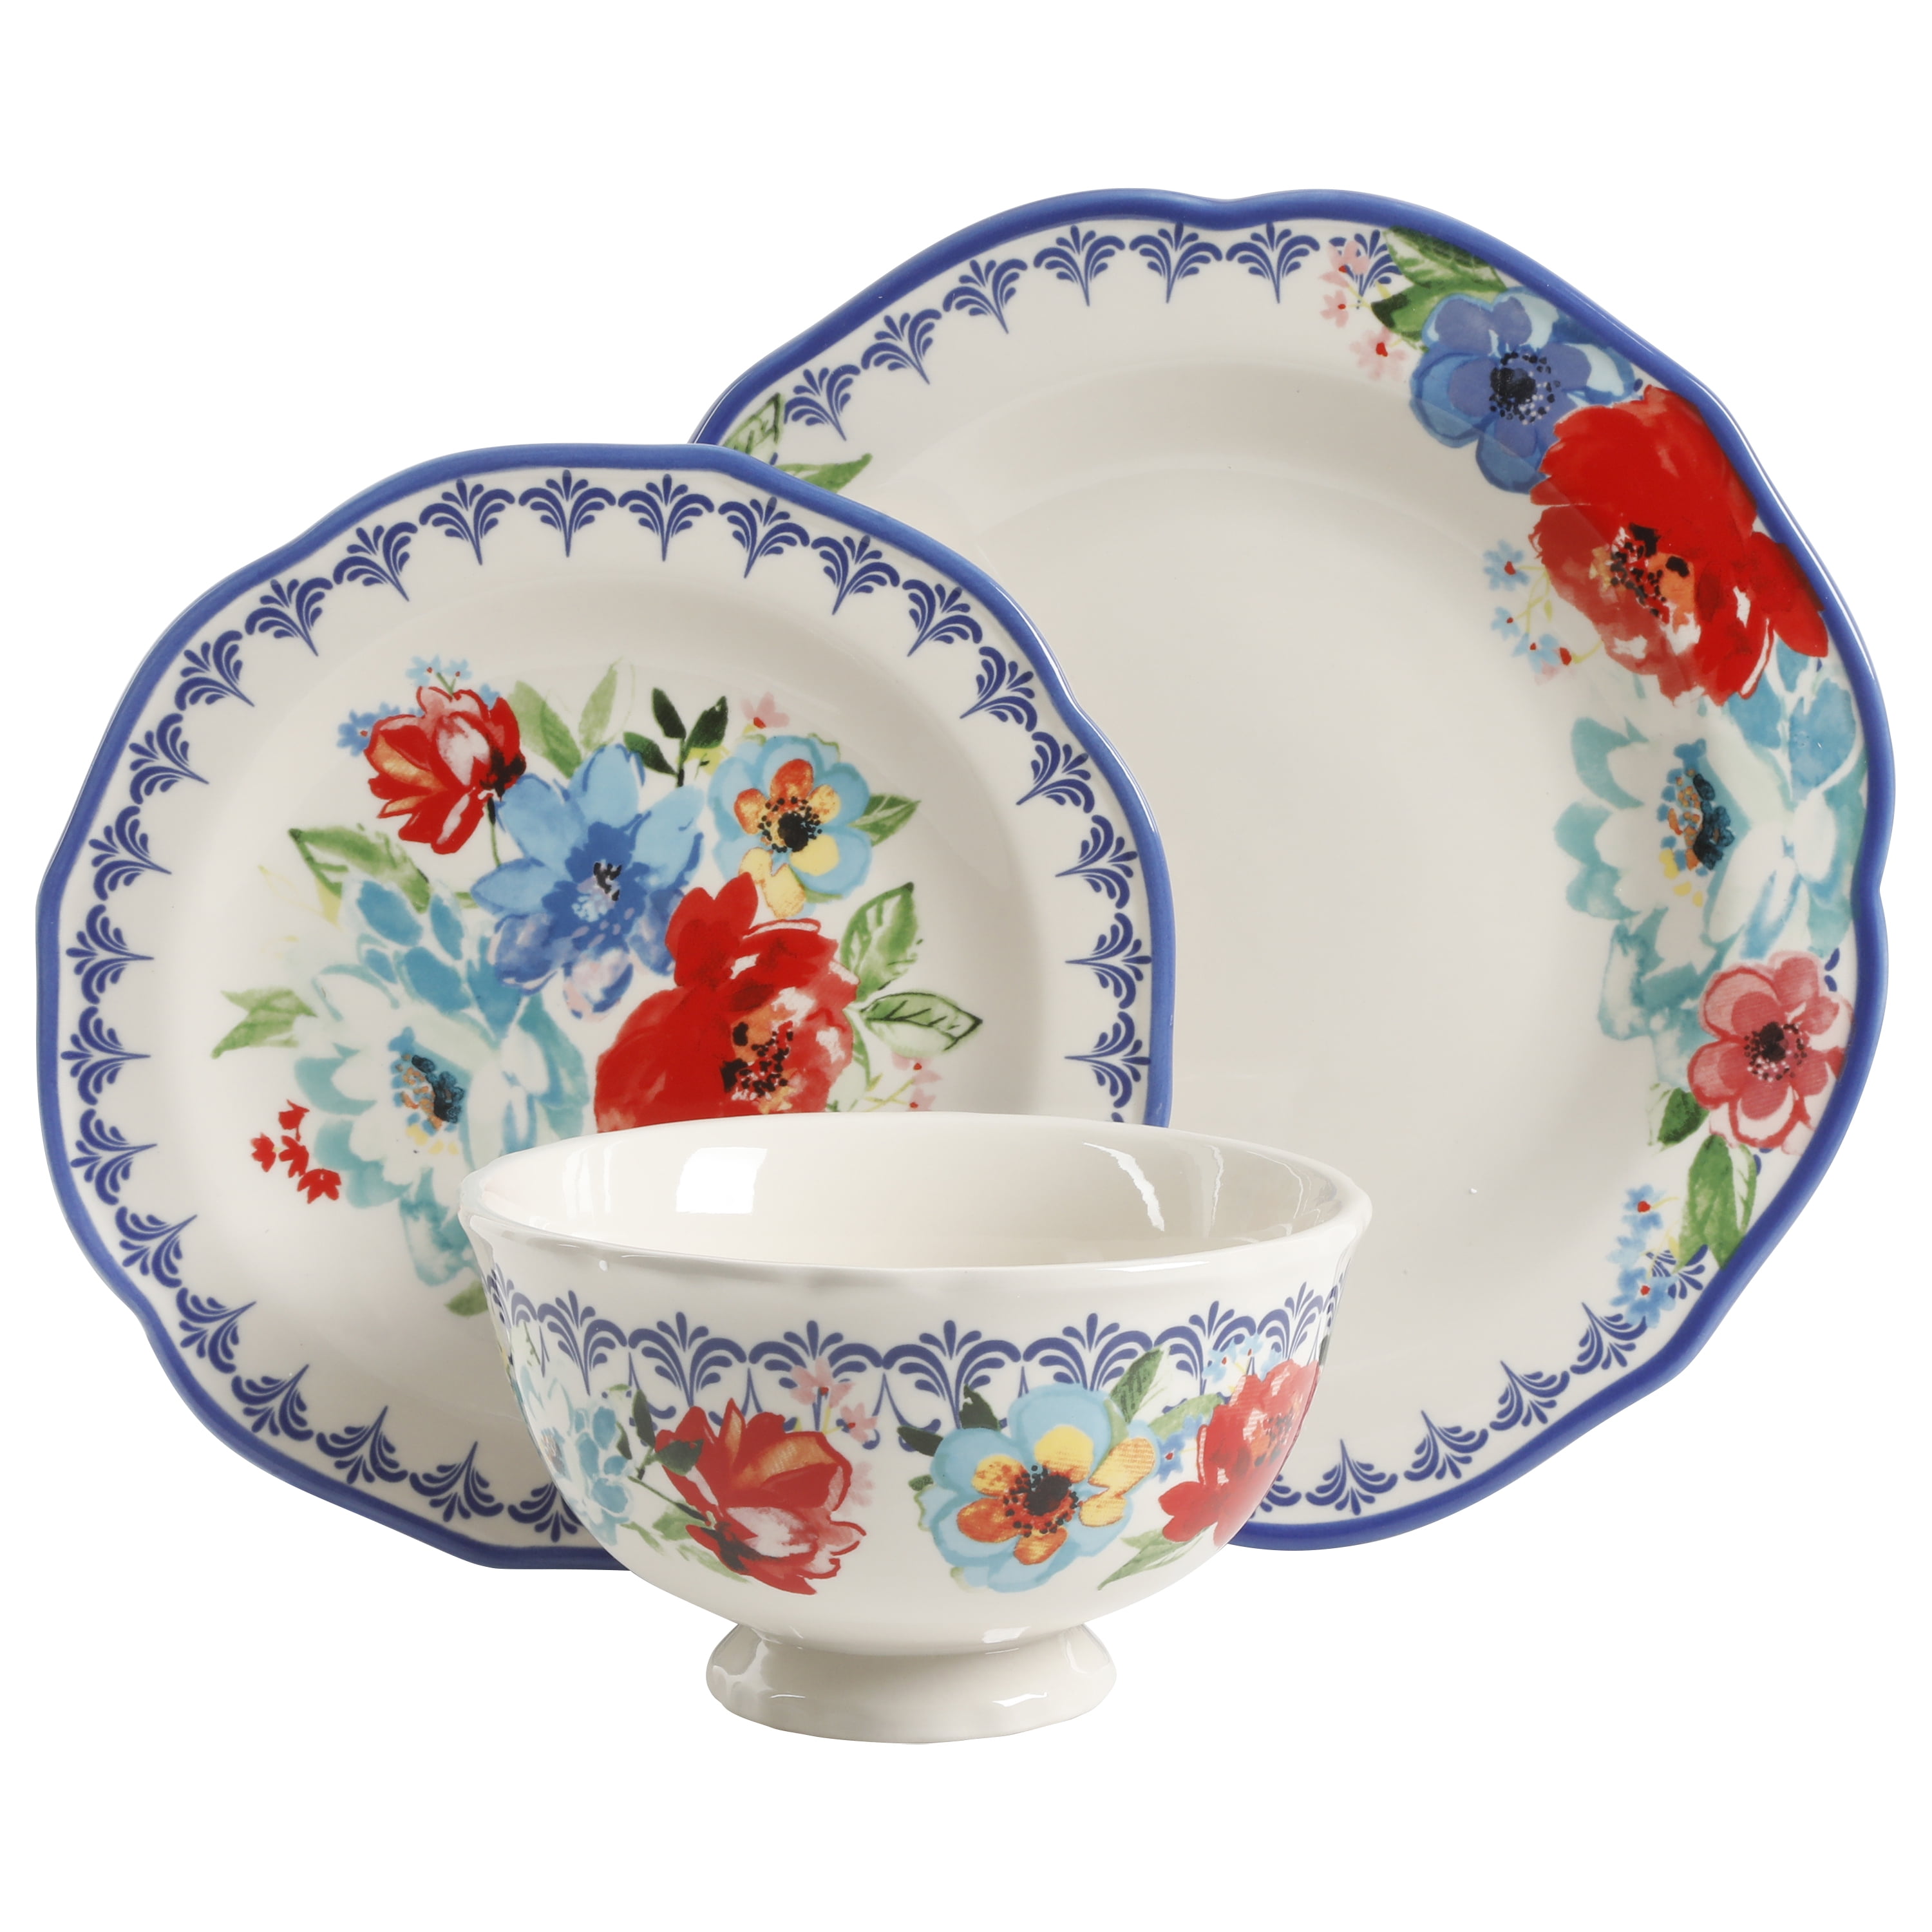 The Pioneer Woman Rose Shadow Dinnerware Set Dishes Plates Bowls Dining 12-Piece 